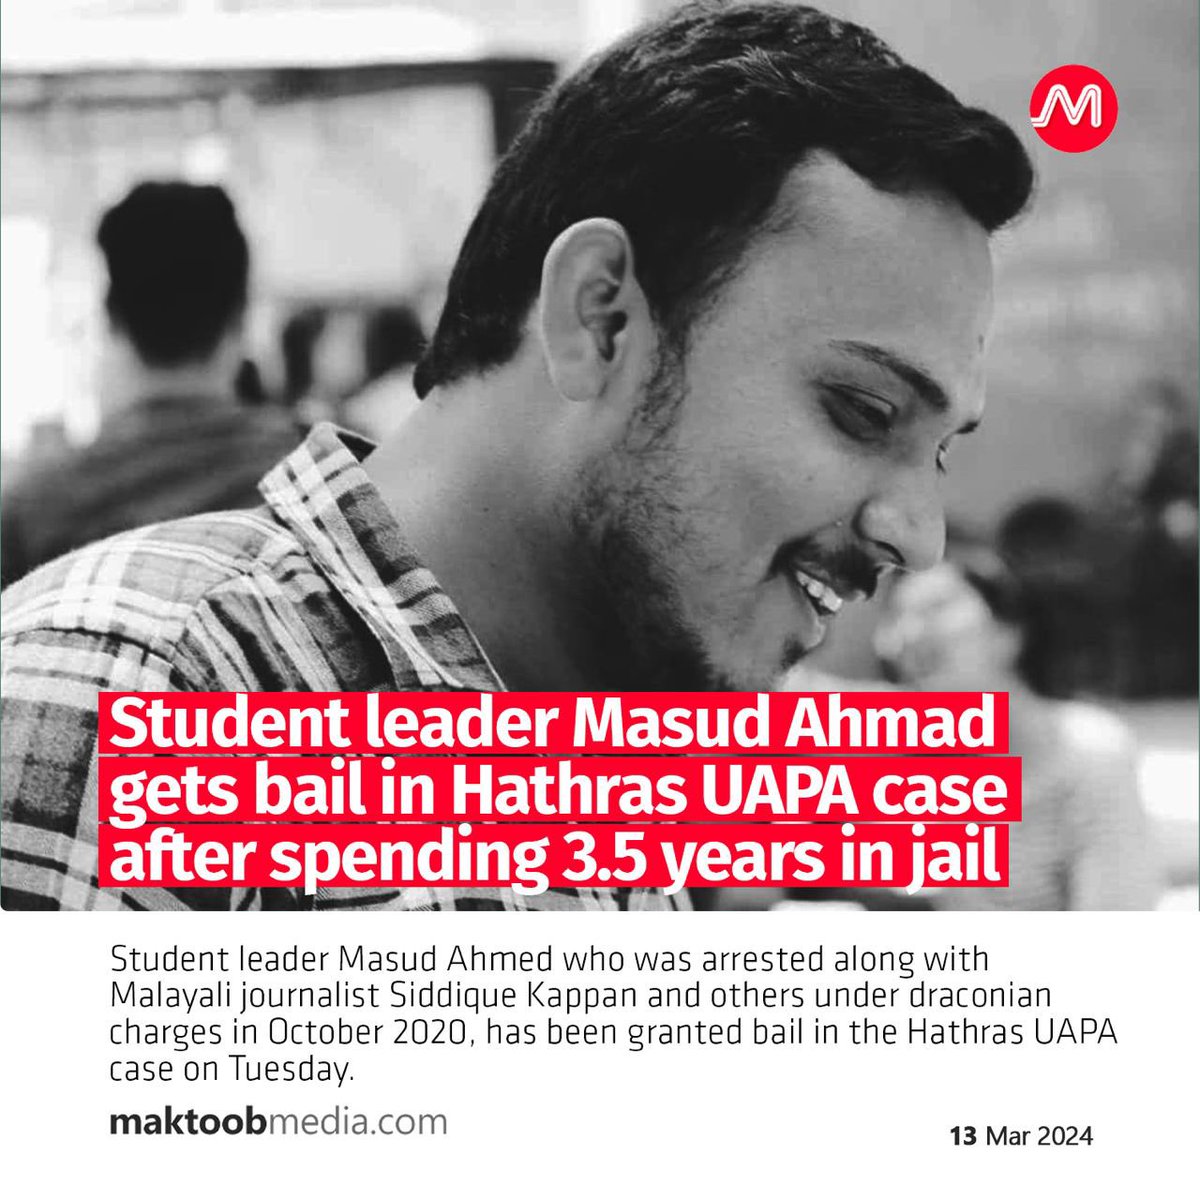 Student leader Masud Ahmed who was arrested along with Malayali journalist Siddique Kappan and others under draconian charges in October 2020, has been granted bail in the Hathras UAPA case on Tuesday.
#HathrasCase